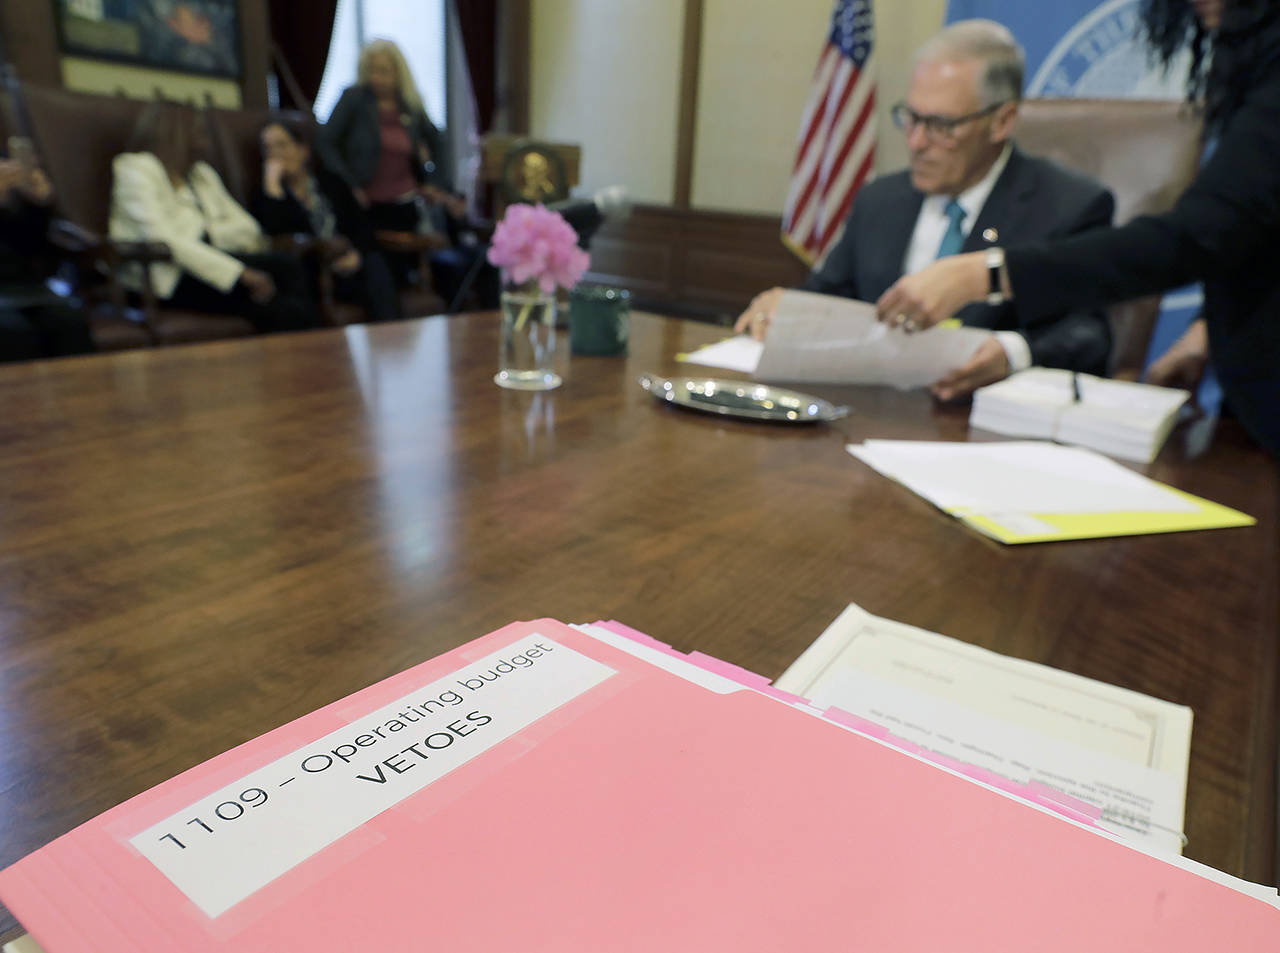 Washington Gov. Jay Inslee uses a red pen to veto sections of the state capital budget, May 21, 2019, at the Capitol in Olympia. (AP Photo/Ted S. Warren, file)